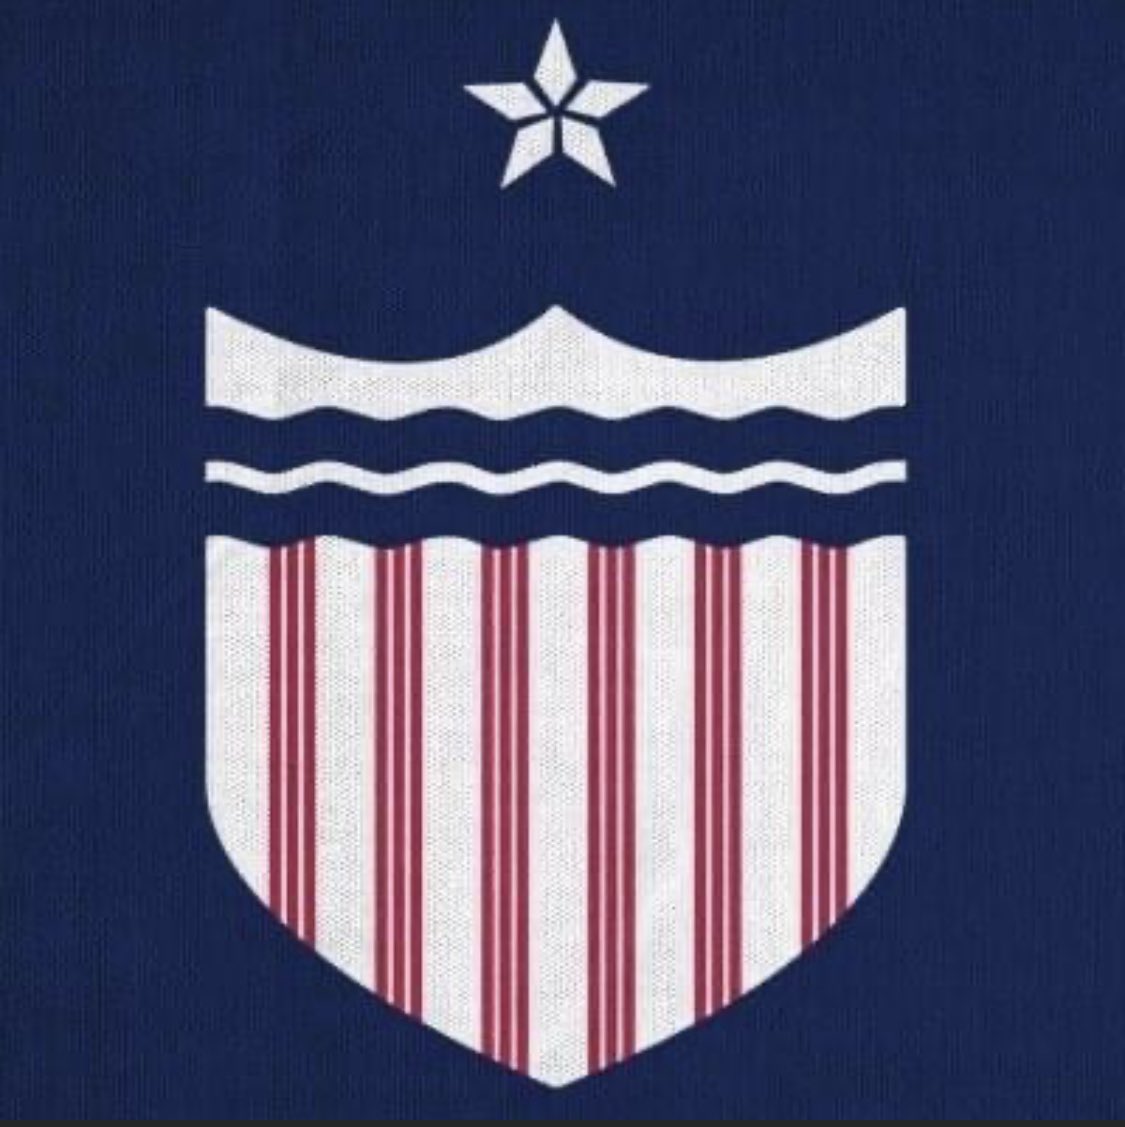 I’ll never forget the time graphic designers started pushing a Mississippi flag that looks like a butthole being dipped in water. https://t.co/5yc1YCC4km